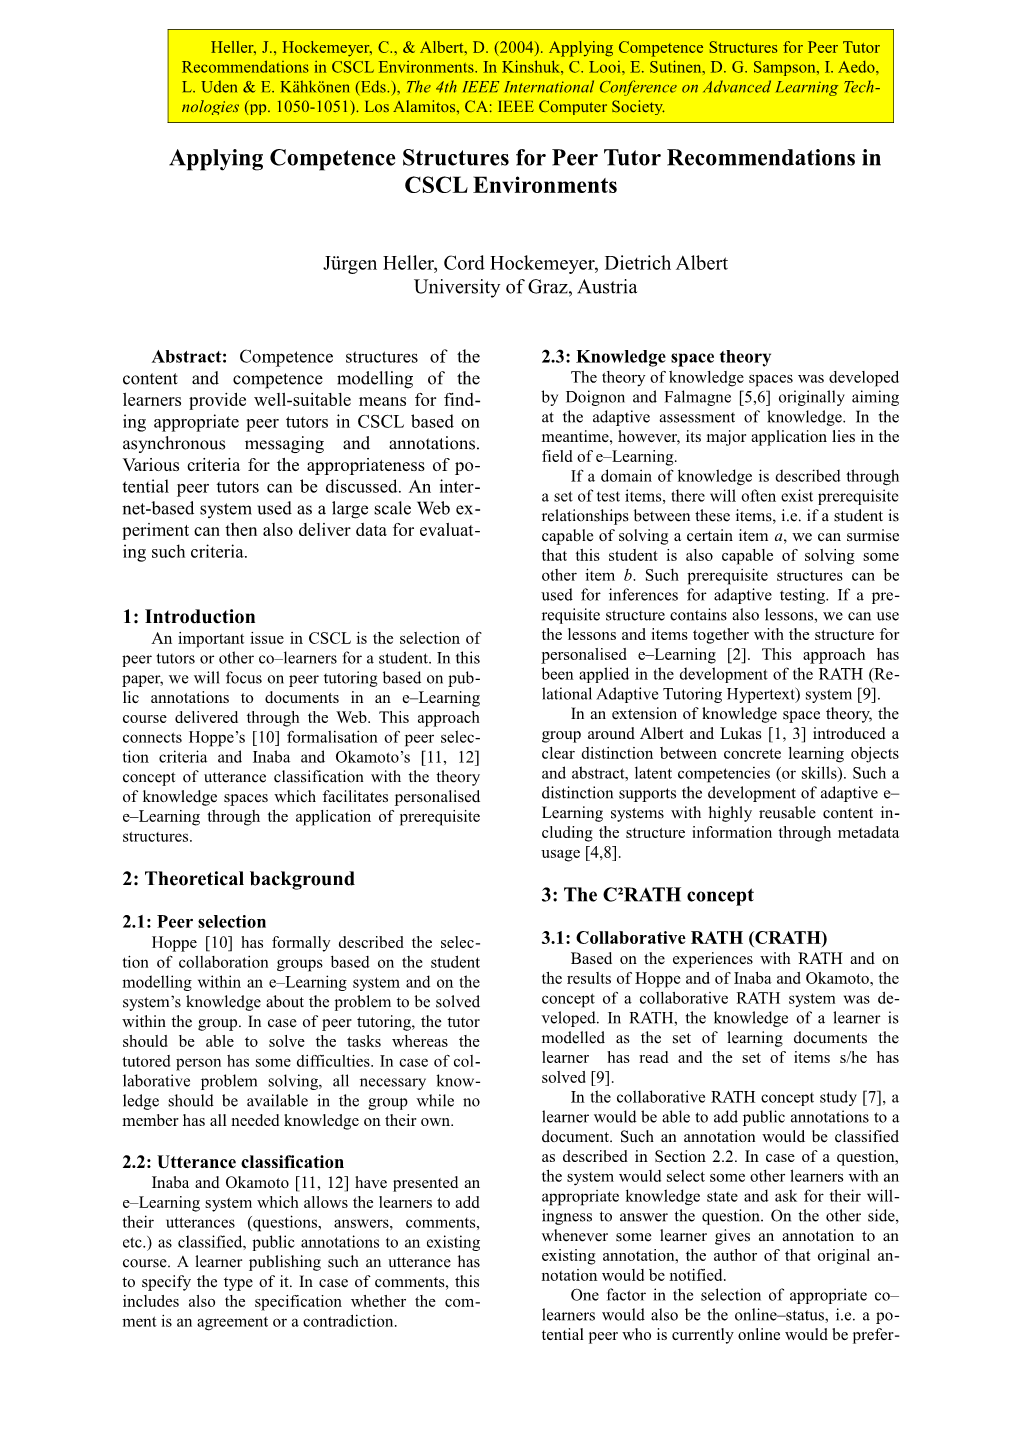 Applying Competence Structures for Peer Tutor Recommendations in CSCL Environments